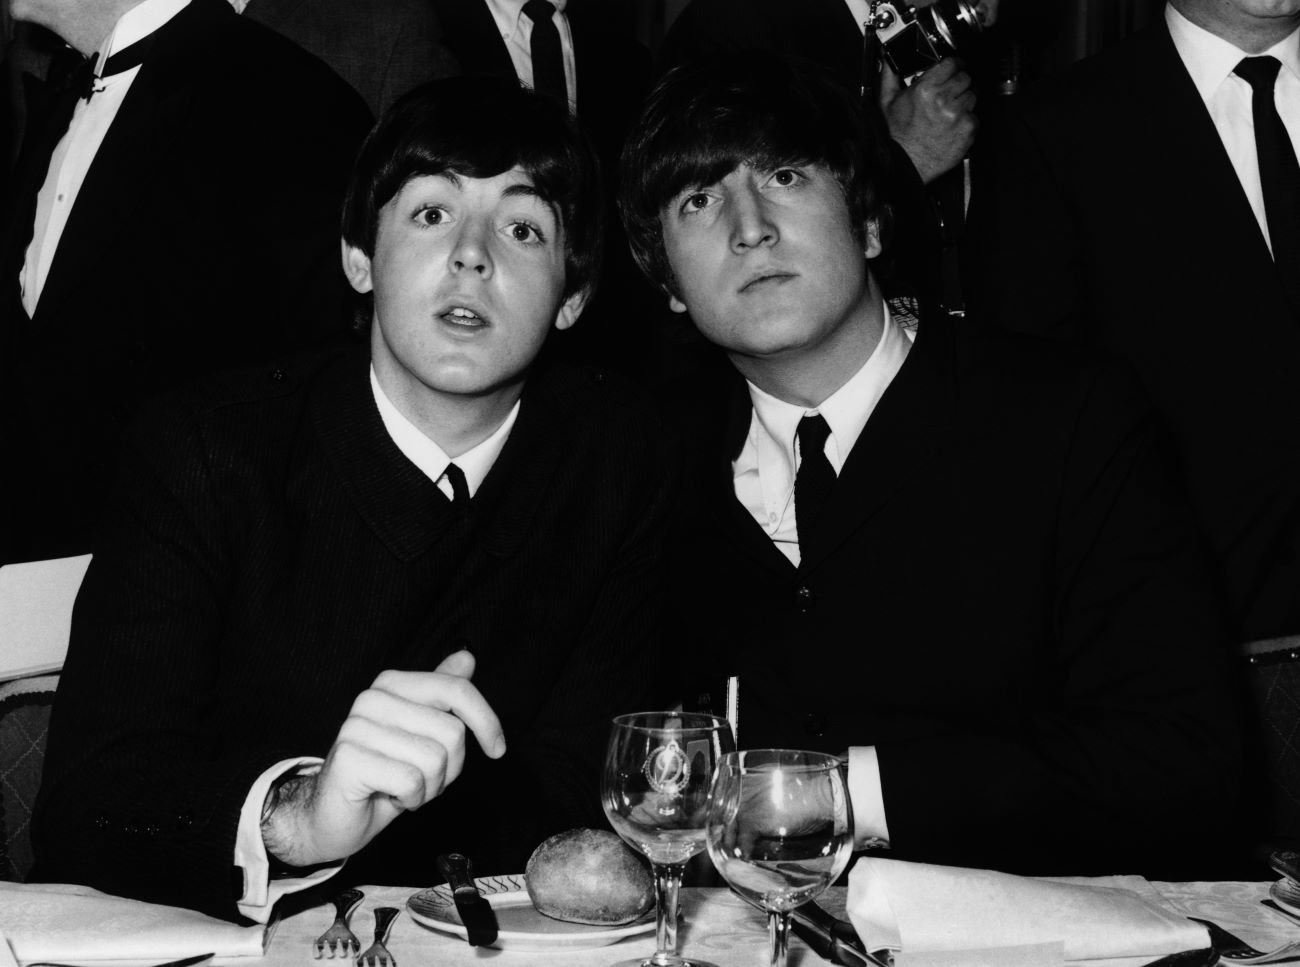 A black and white photo of Paul McCartney and John Lennon sitting at a table together.